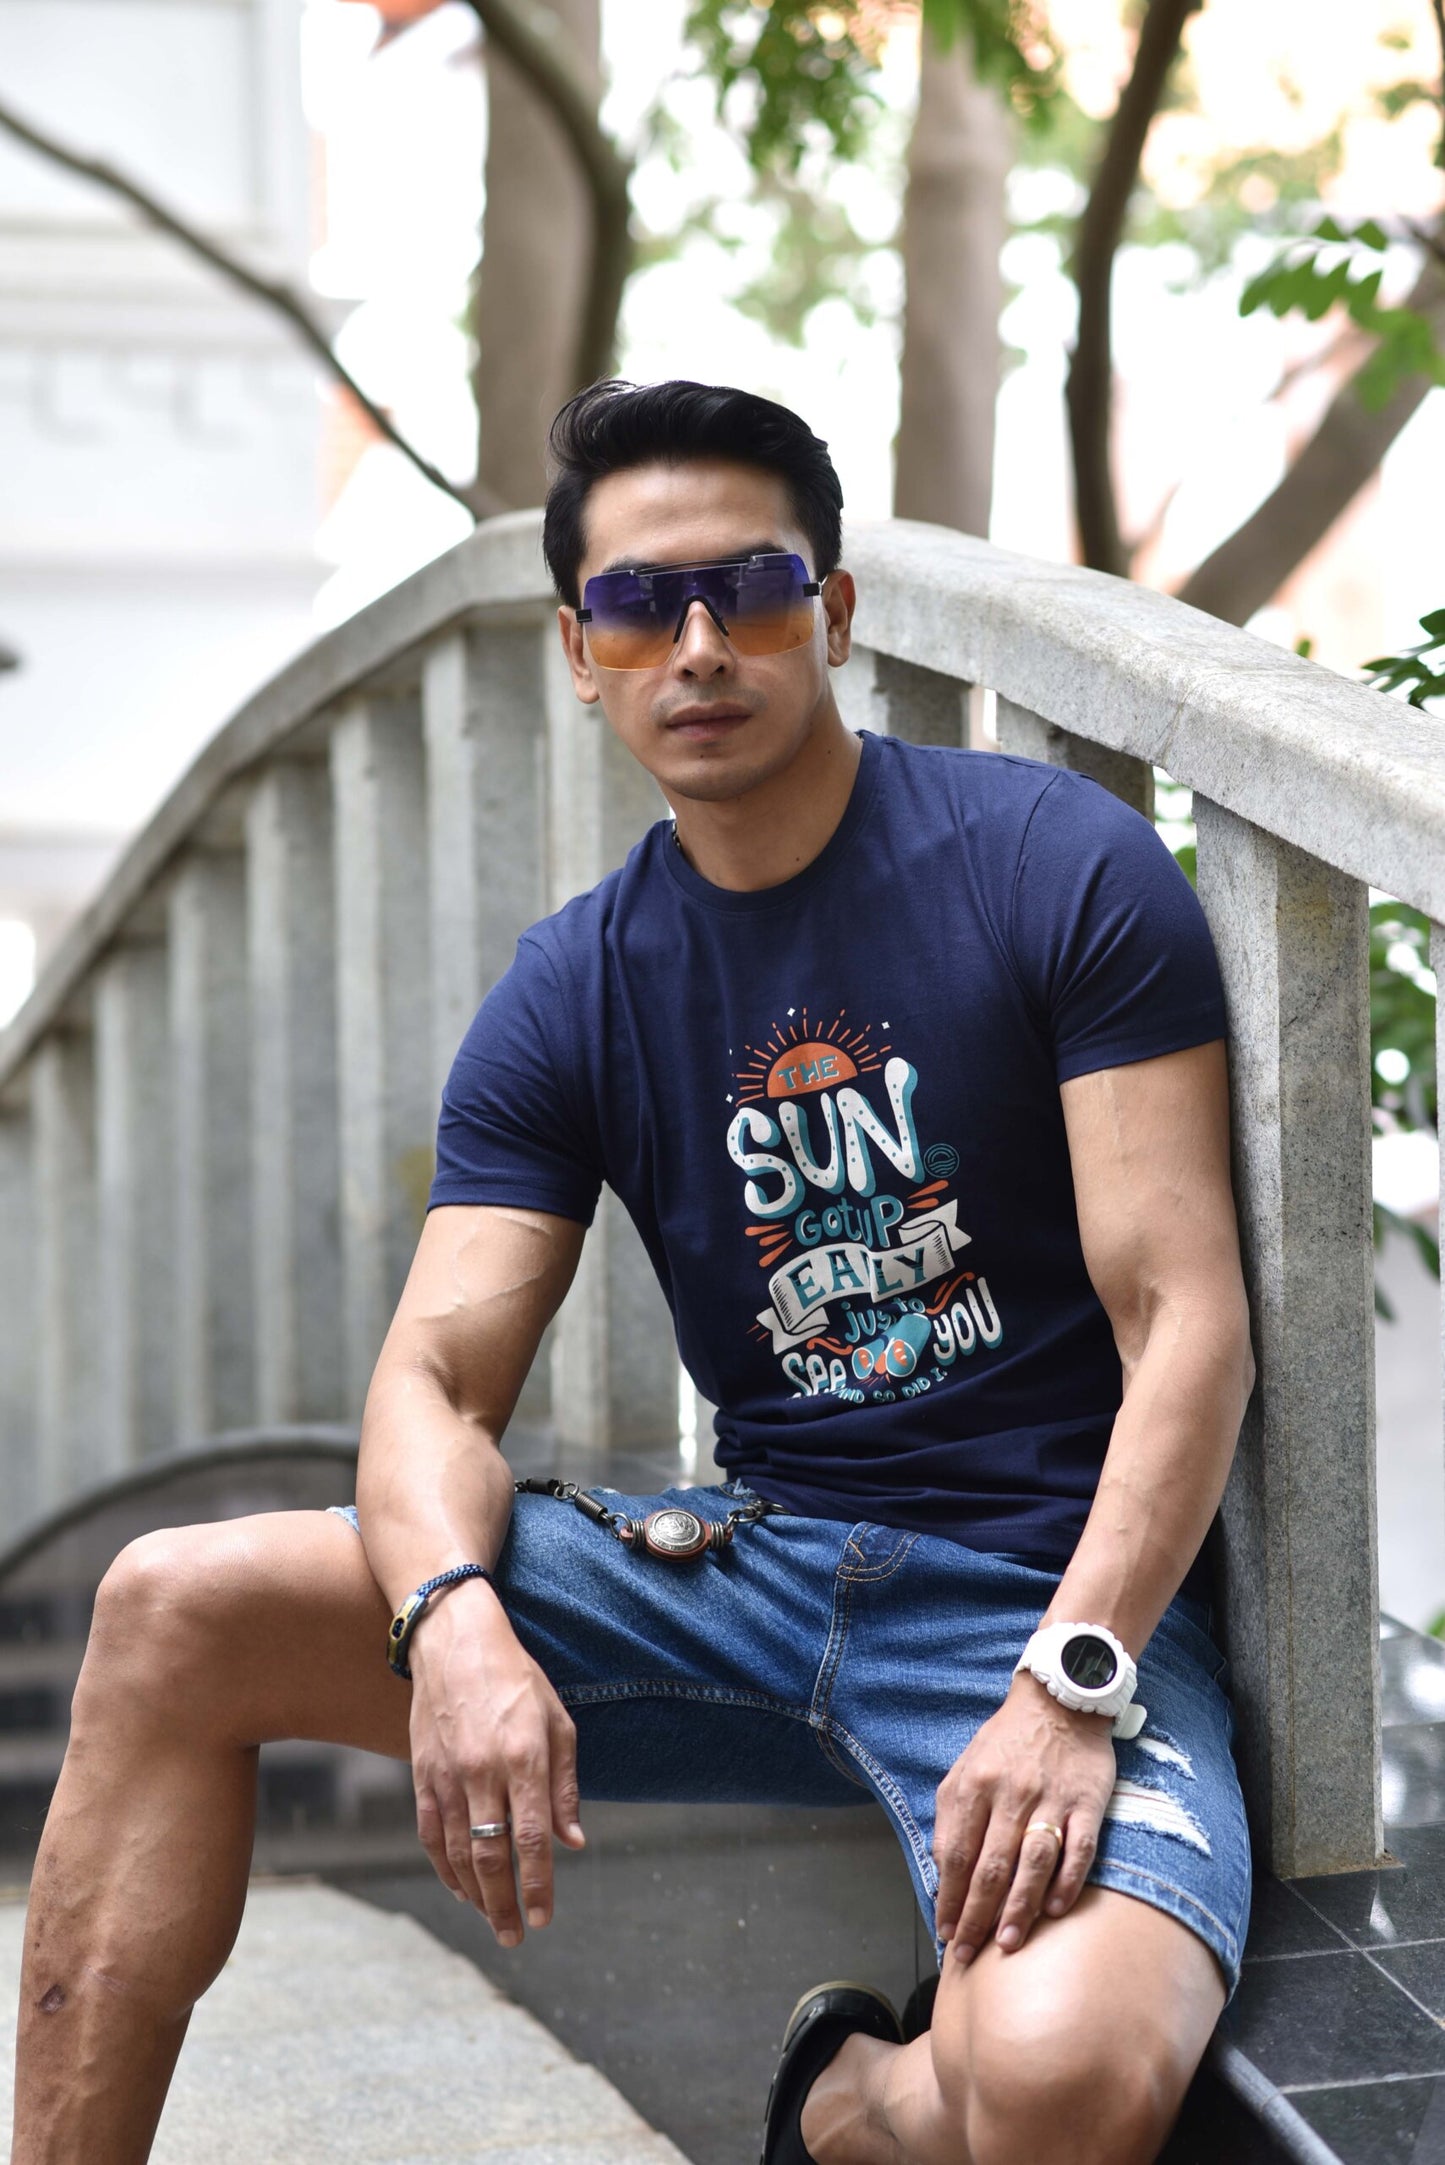 SUN GOT UP EARLY JUST TO SEE YOU | PRINTED T-SHIRTS FOR MEN